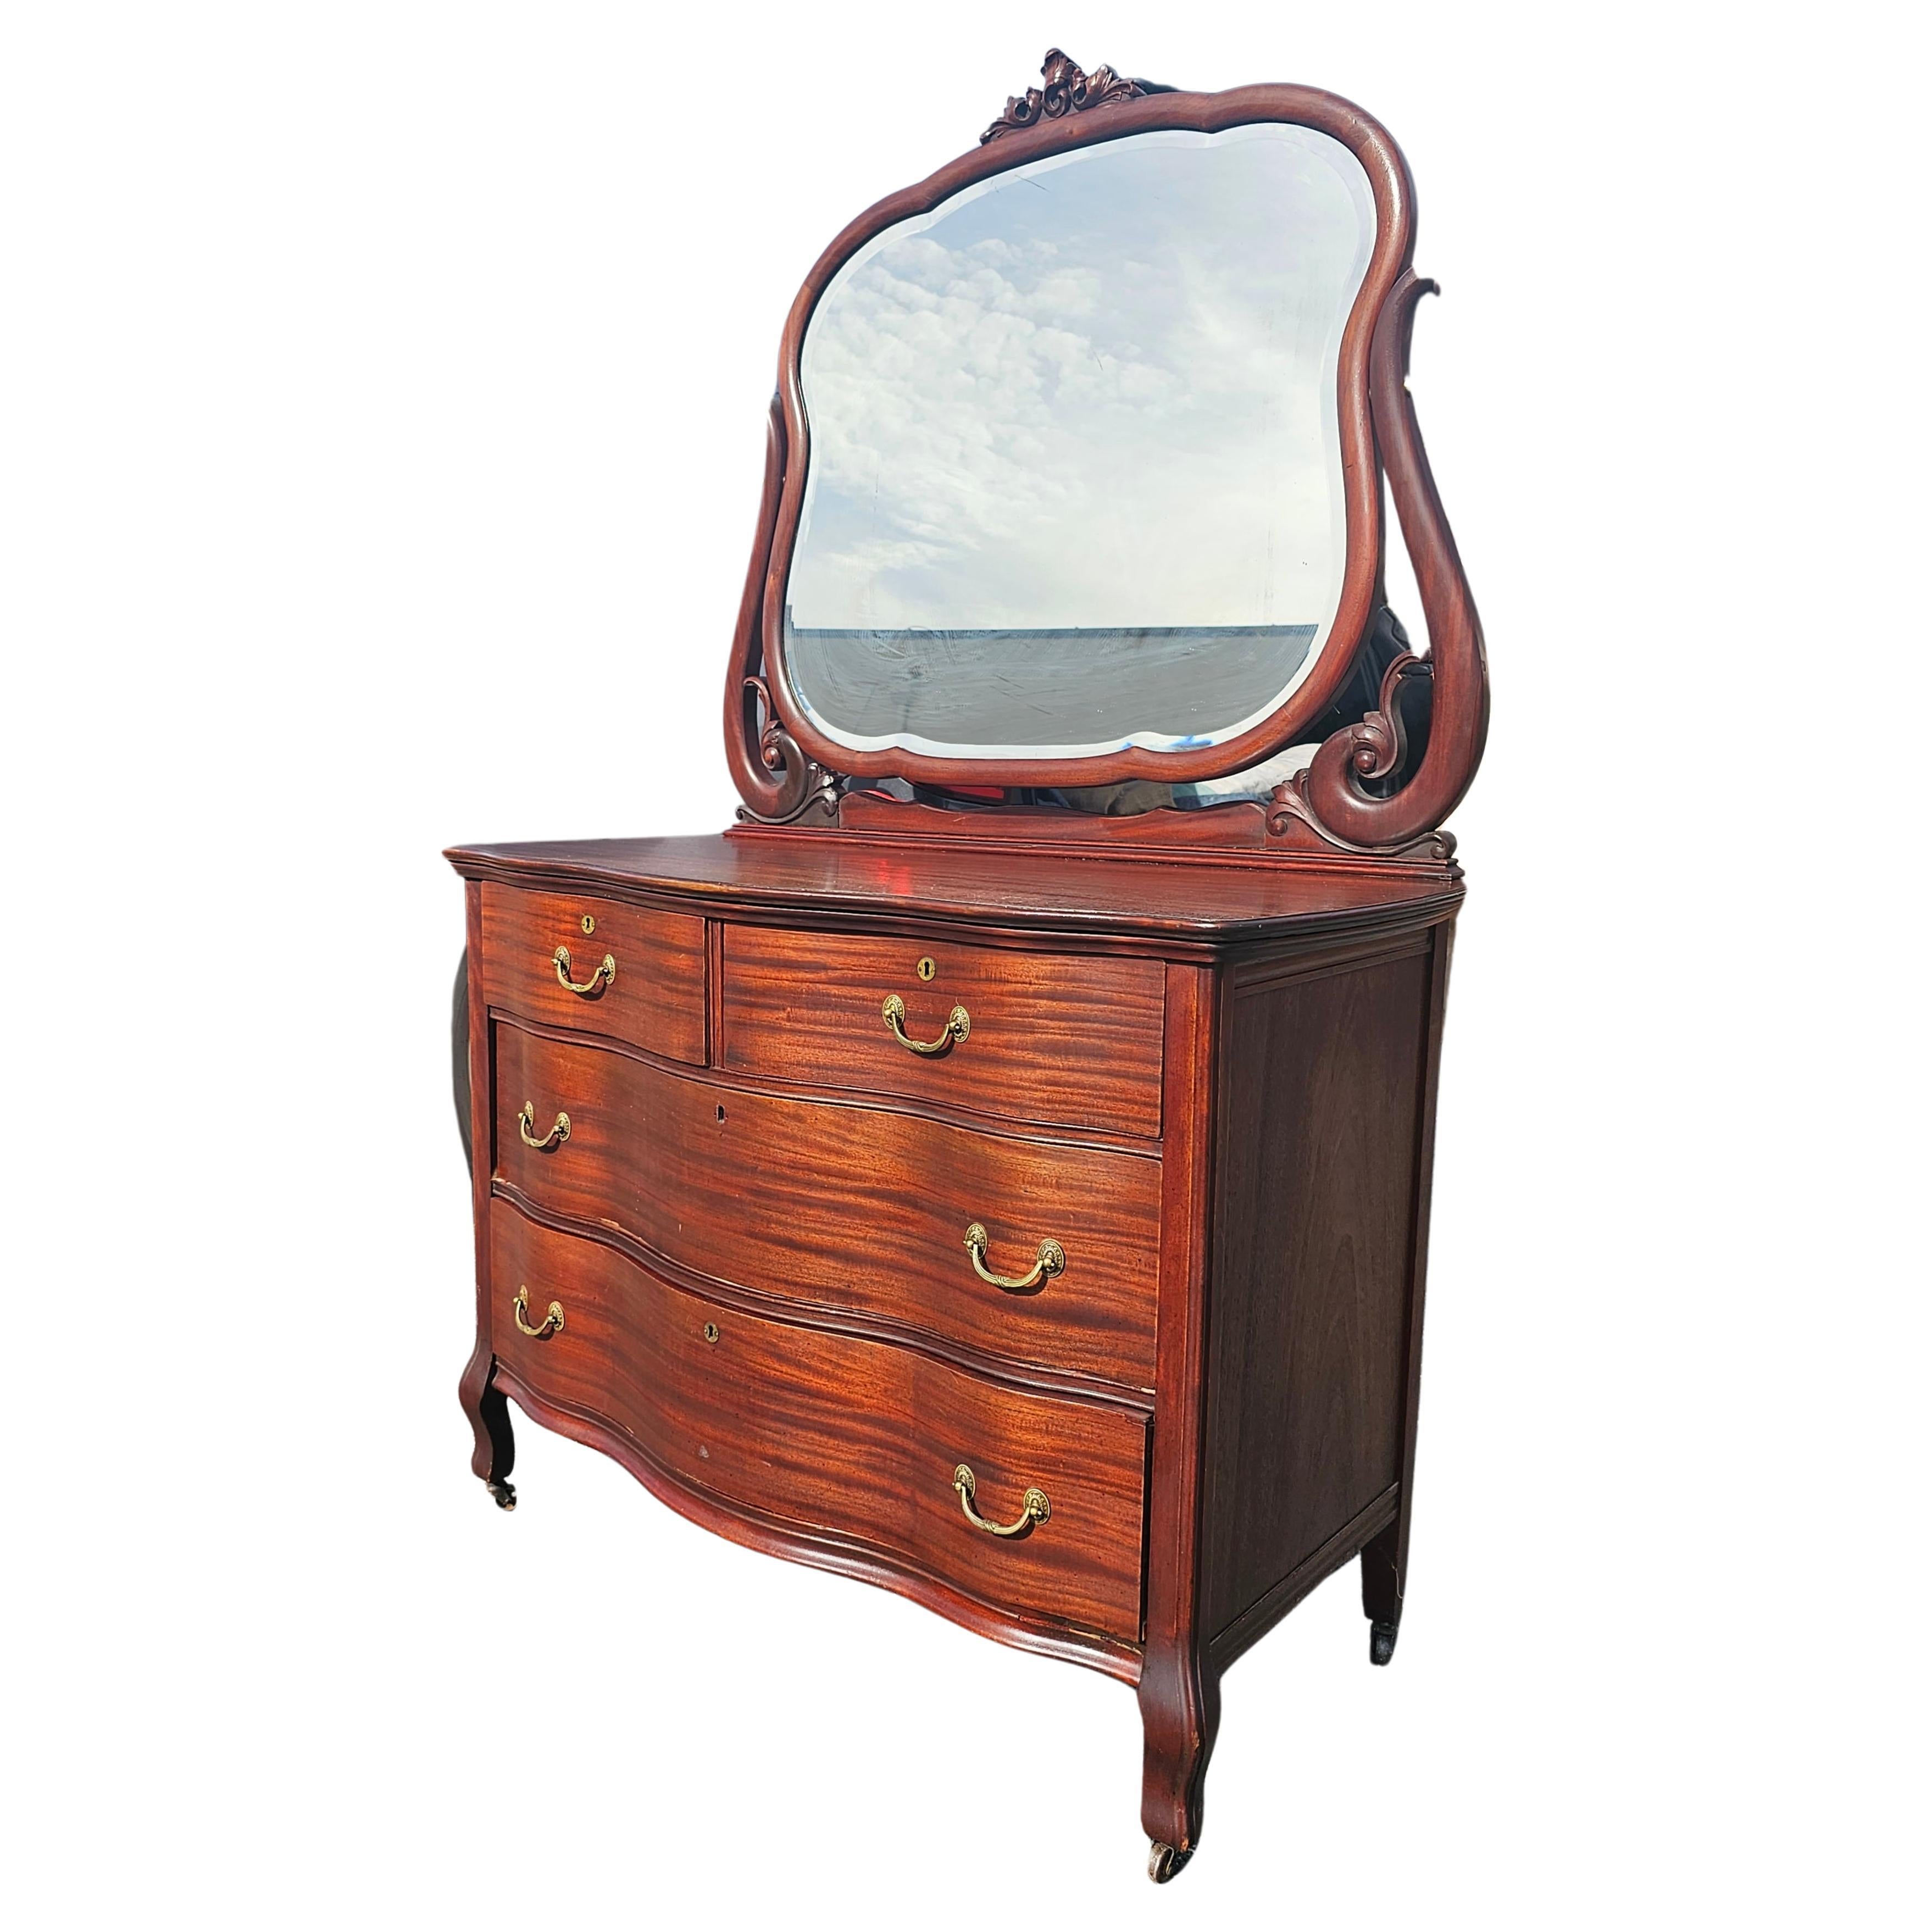 Other Early 20th Century Widdicomb Mahogany Serpentine Chest with Mirror on Wheels For Sale